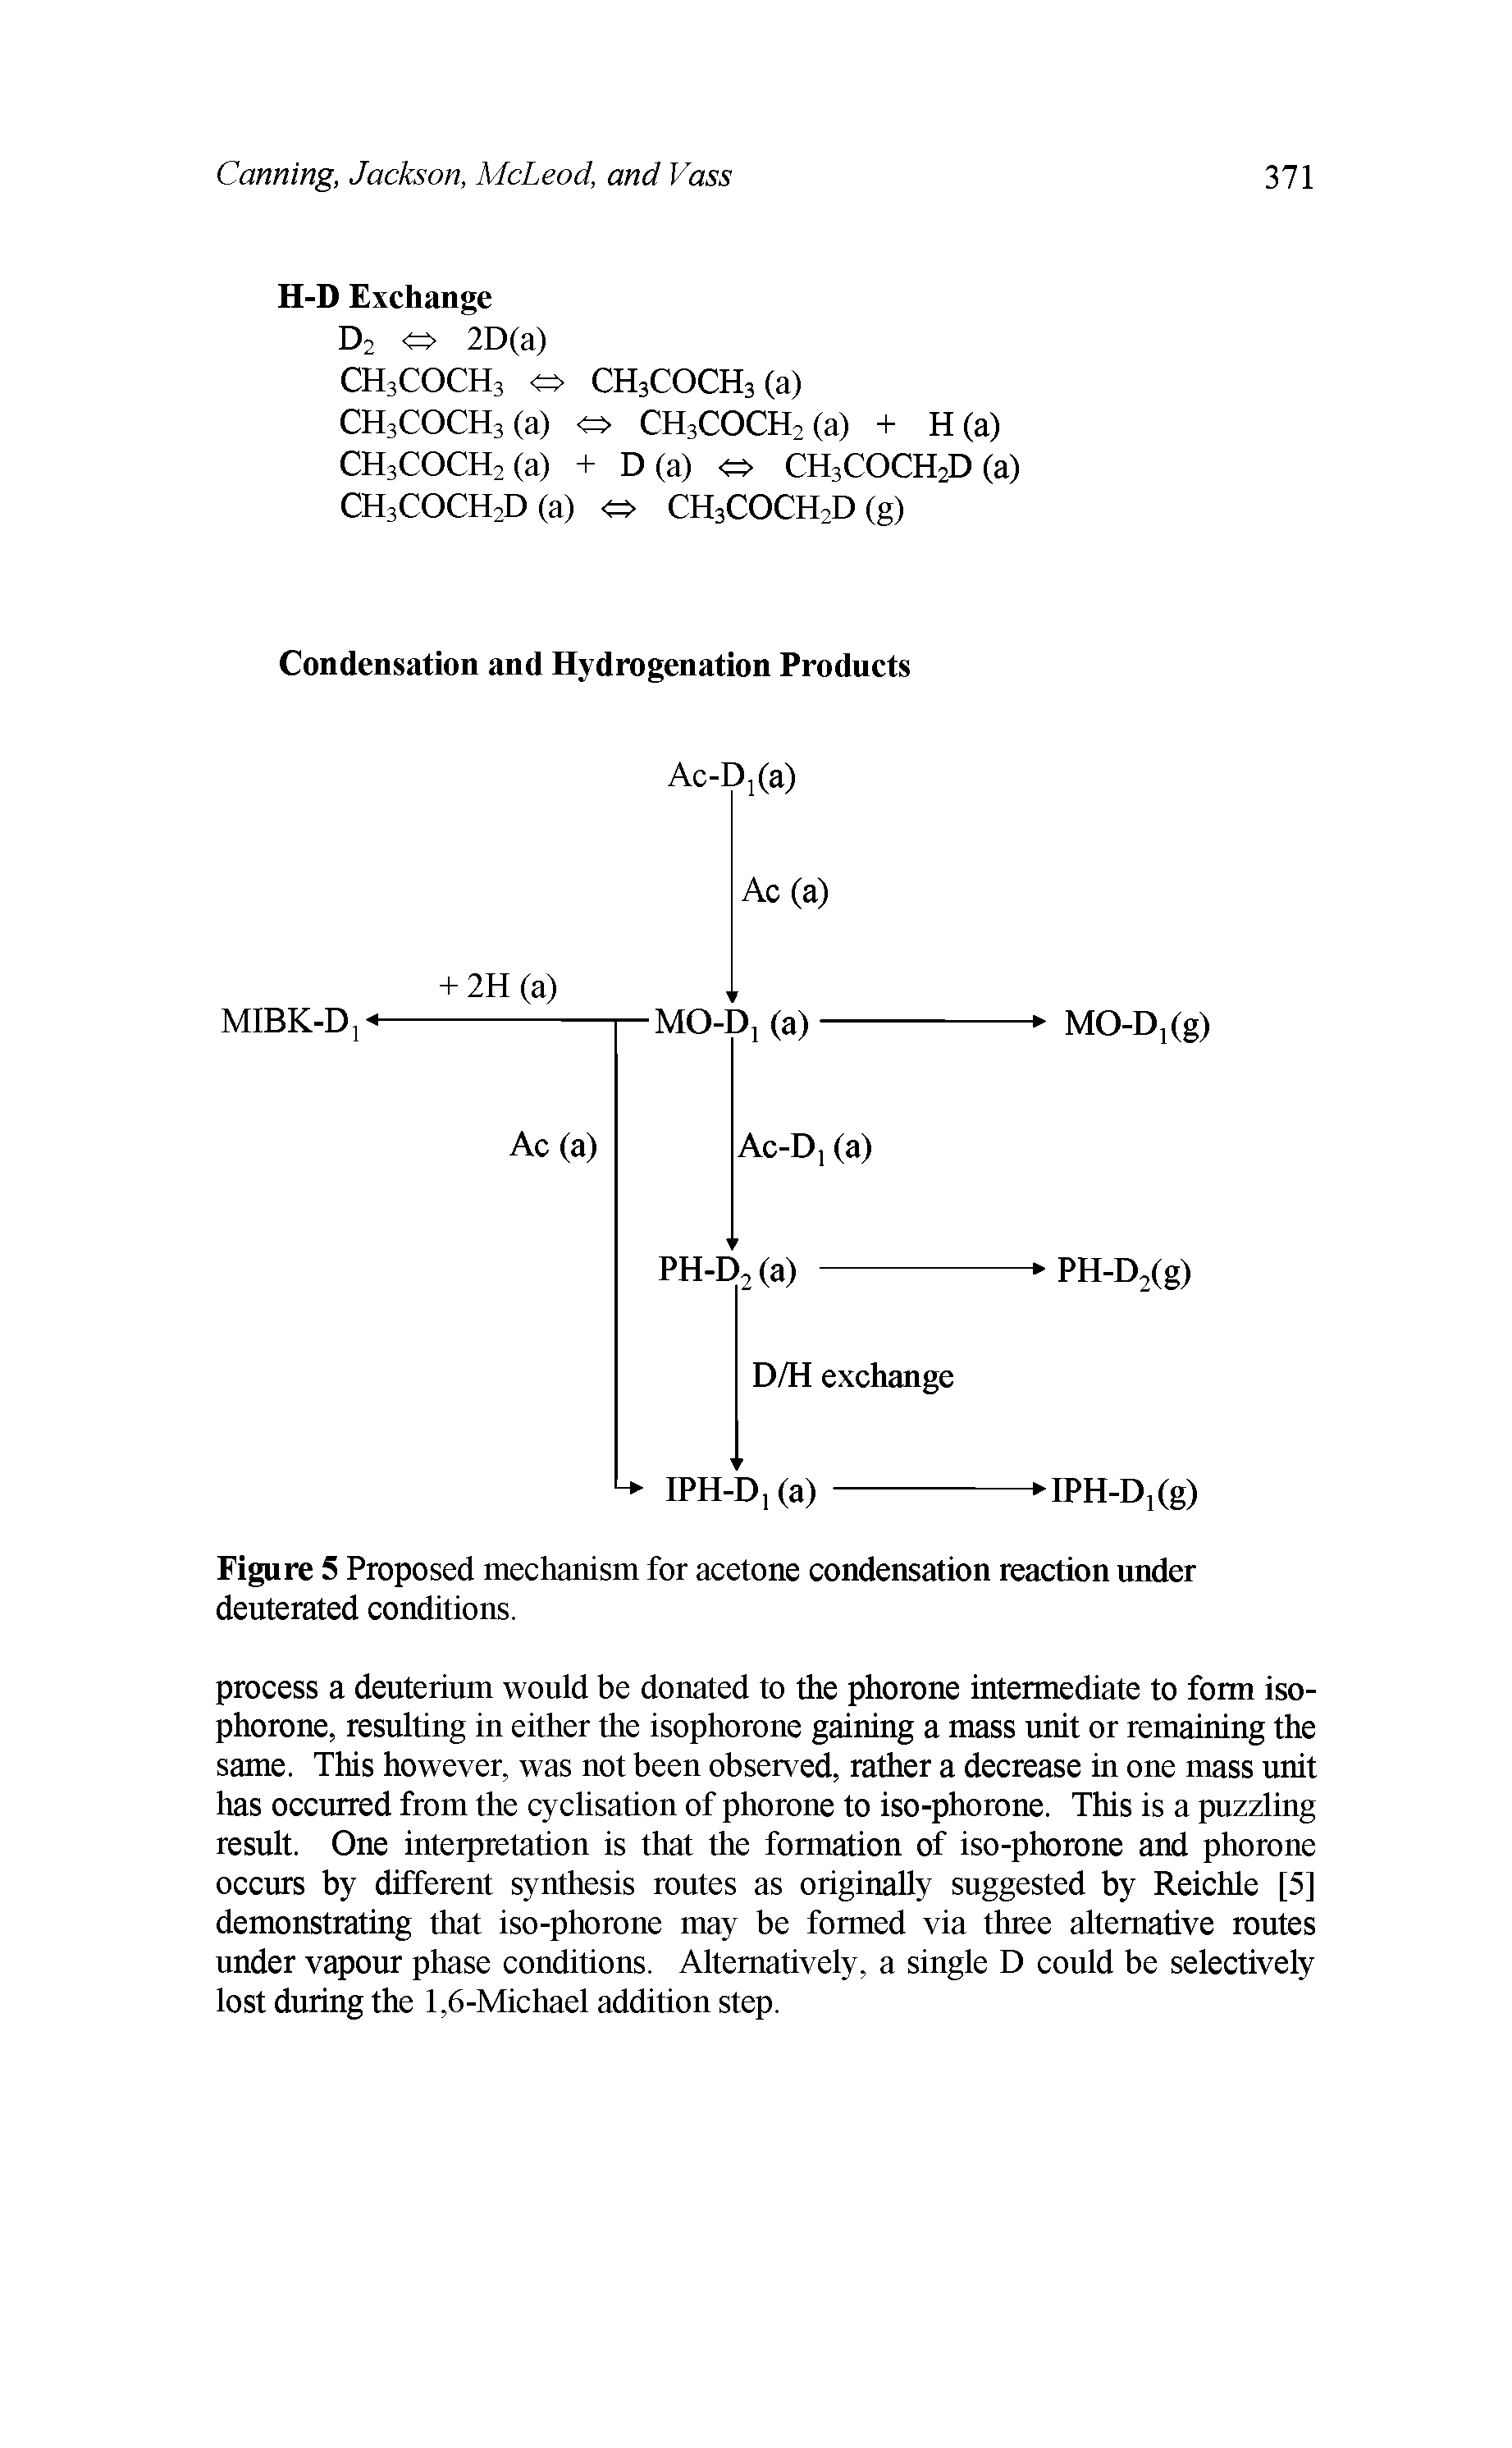 Figure 5 Proposed mechanism for acetone condensation reaction under deuterated conditions.